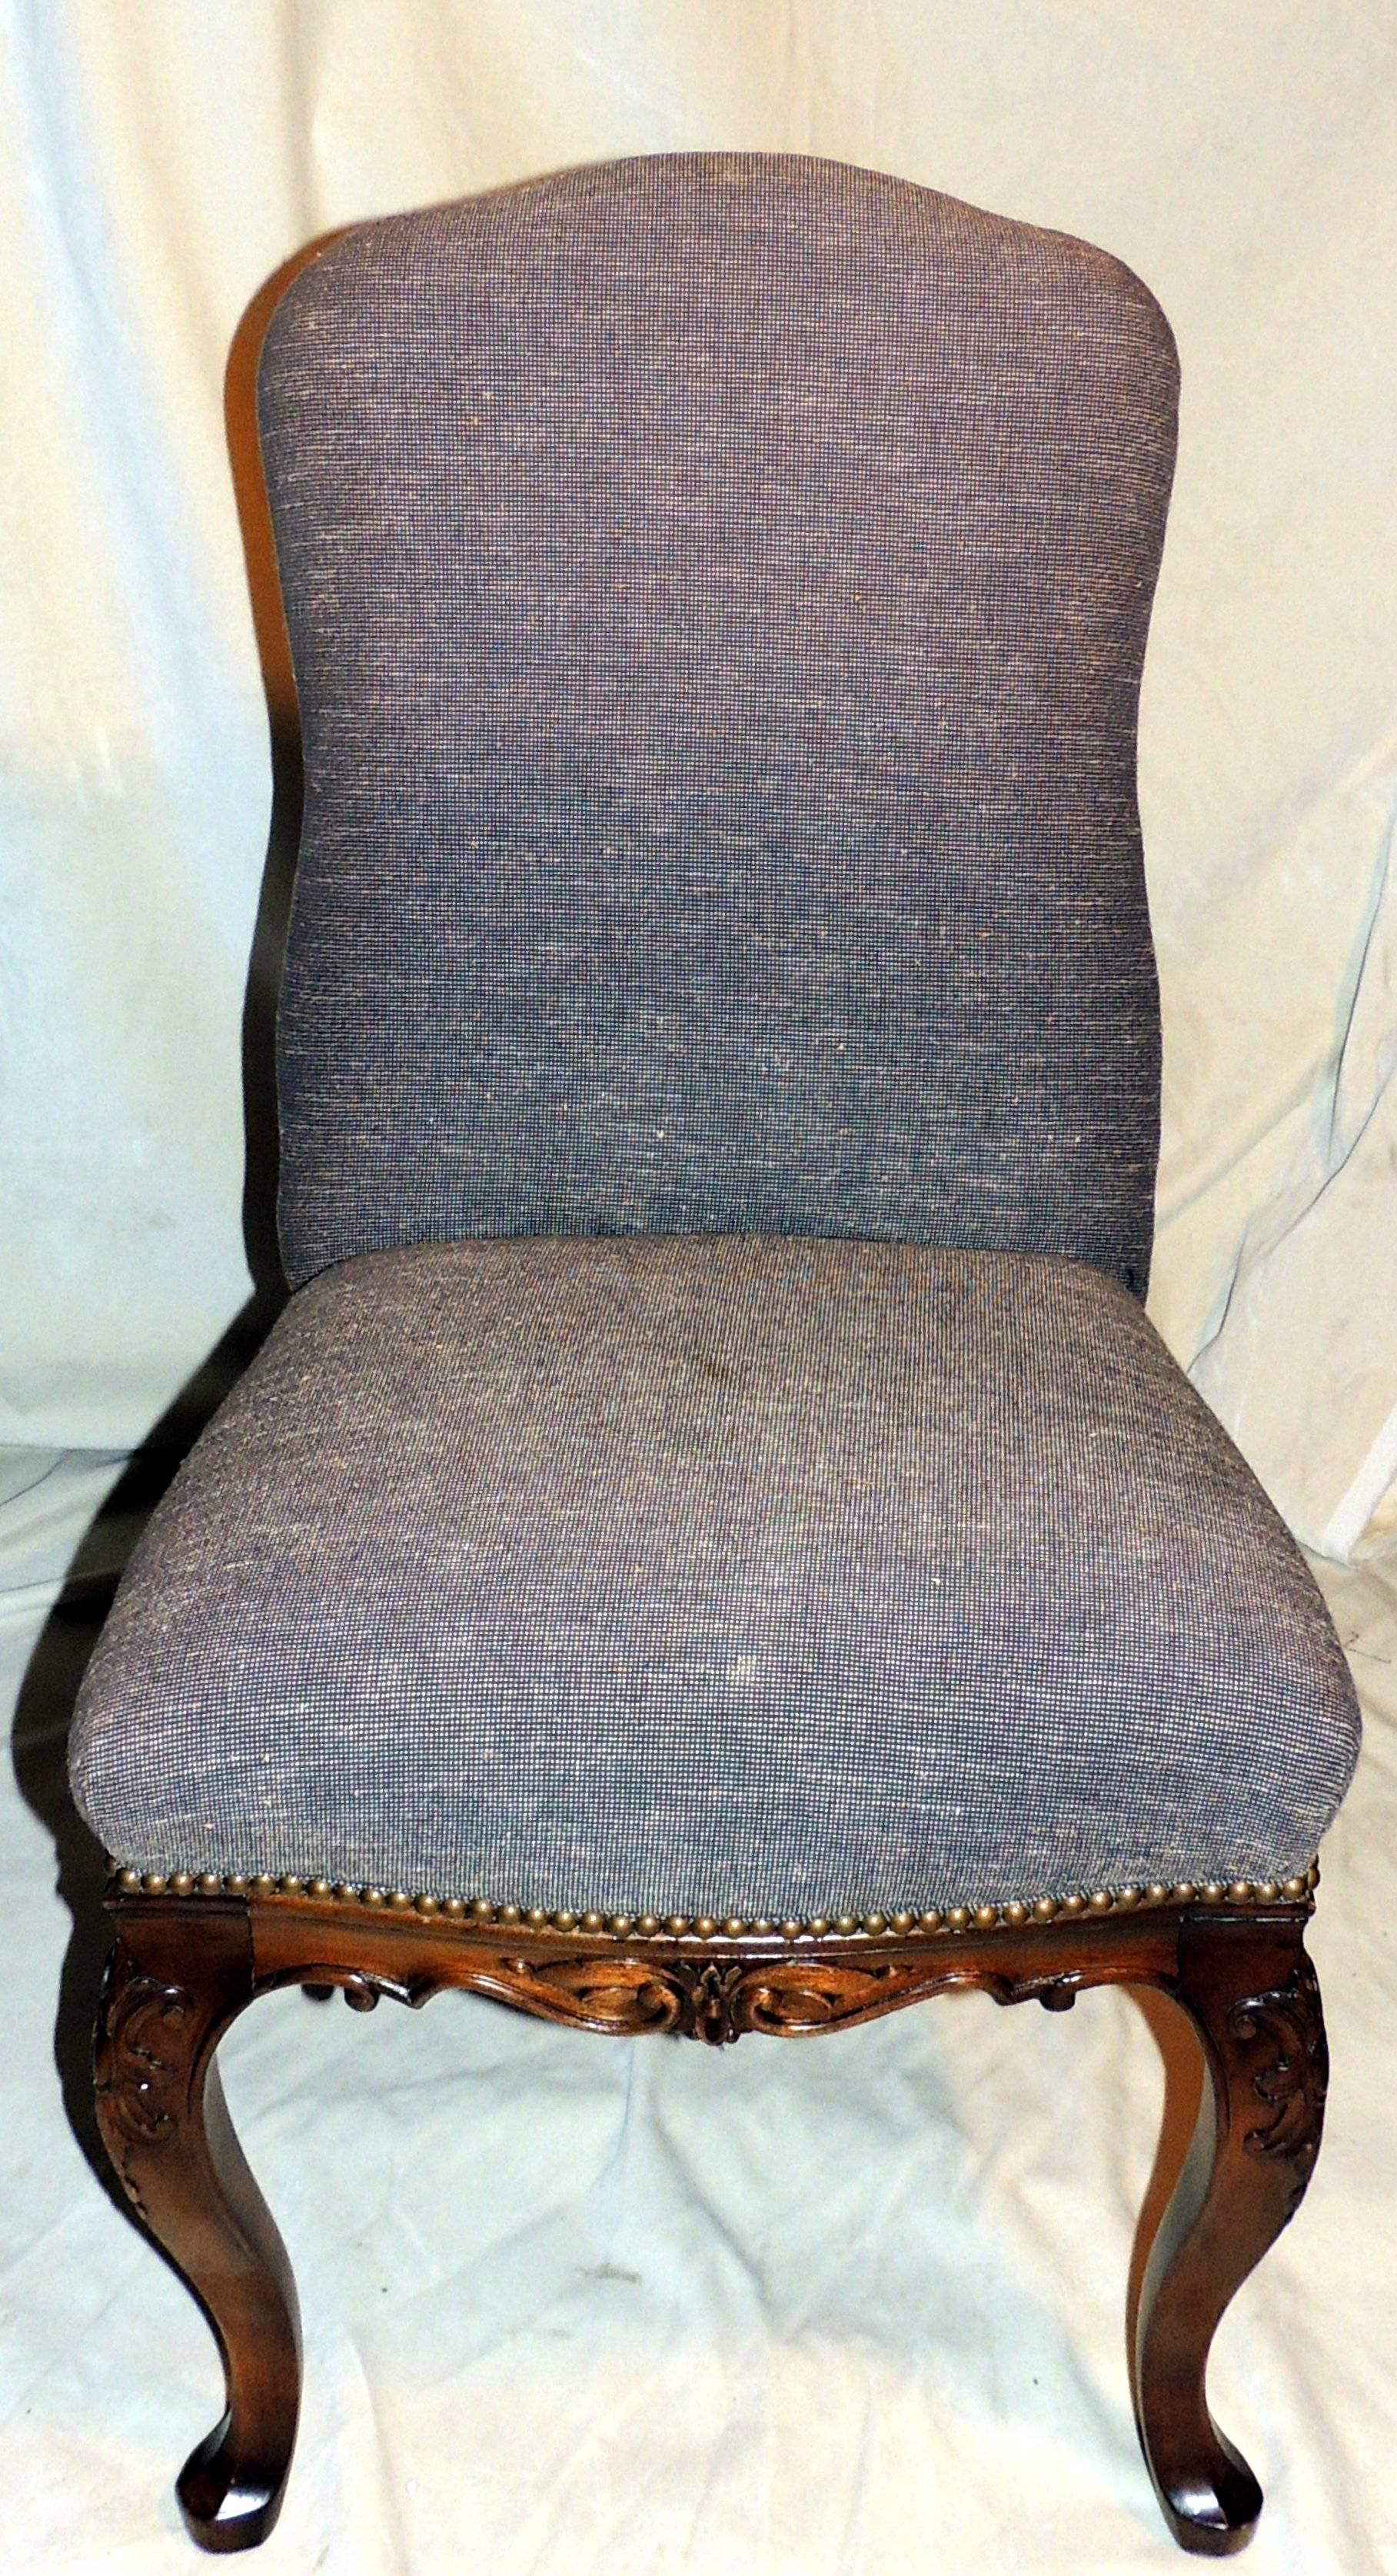 The two armchairs have straight back, scrolled carved arms, nail trim throughout.
The matching side chairs have curved back and nail trim throughout.

 Measures:
Armchairs: 22